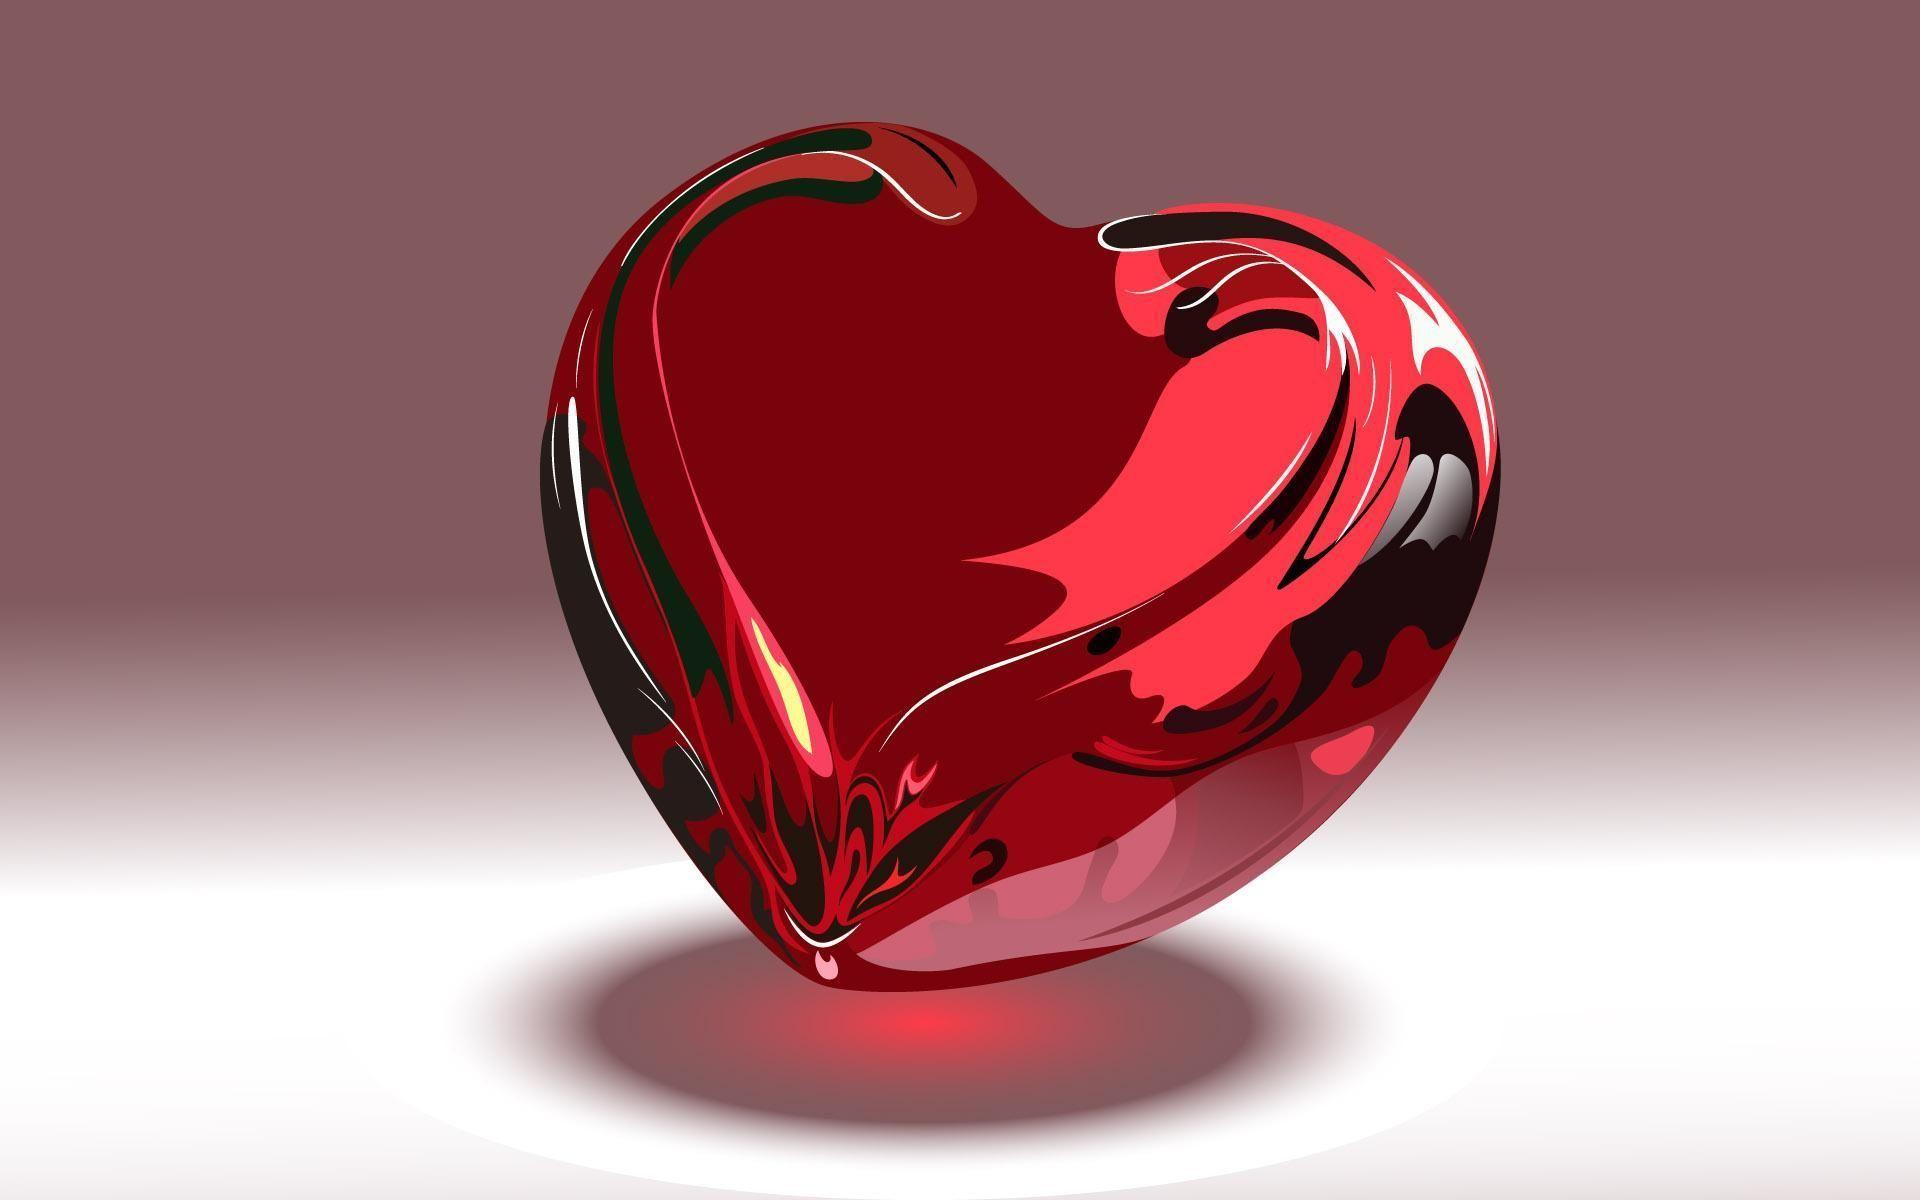 Crystal Heart Wallpaper Free Crystal Heart Background